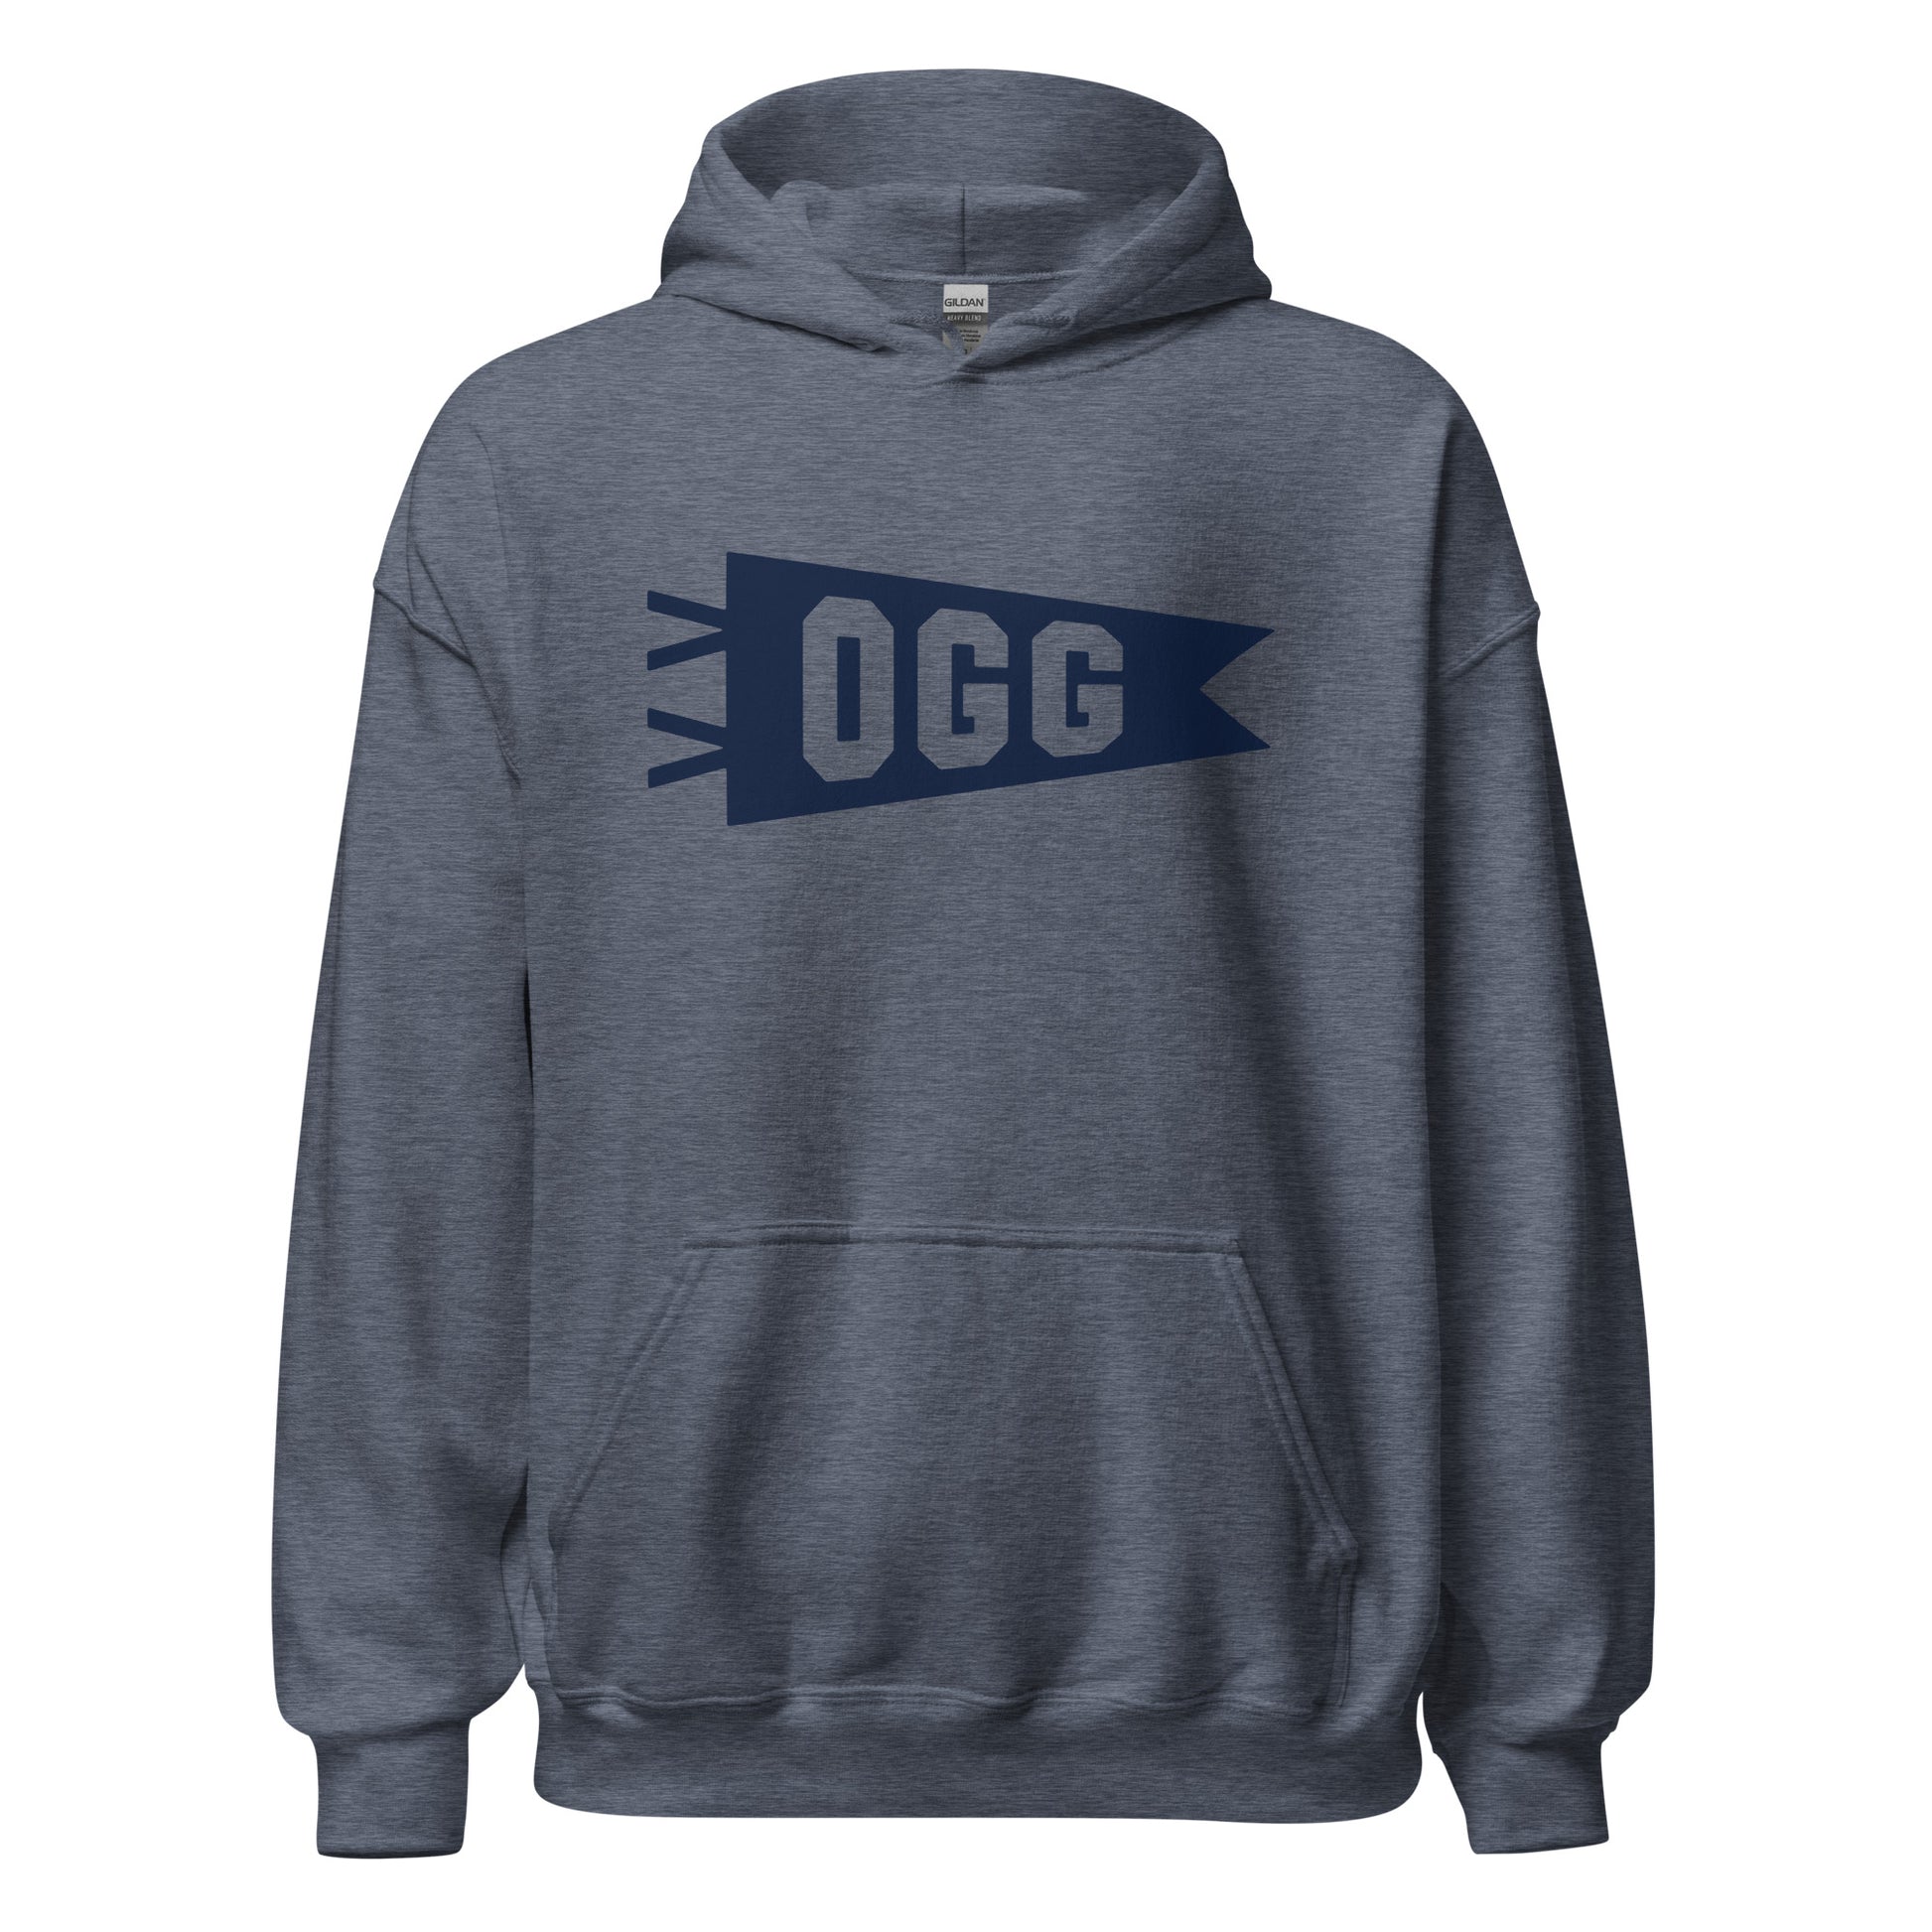 Airport Code Unisex Hoodie - Navy Blue Graphic • OGG Maui • YHM Designs - Image 05